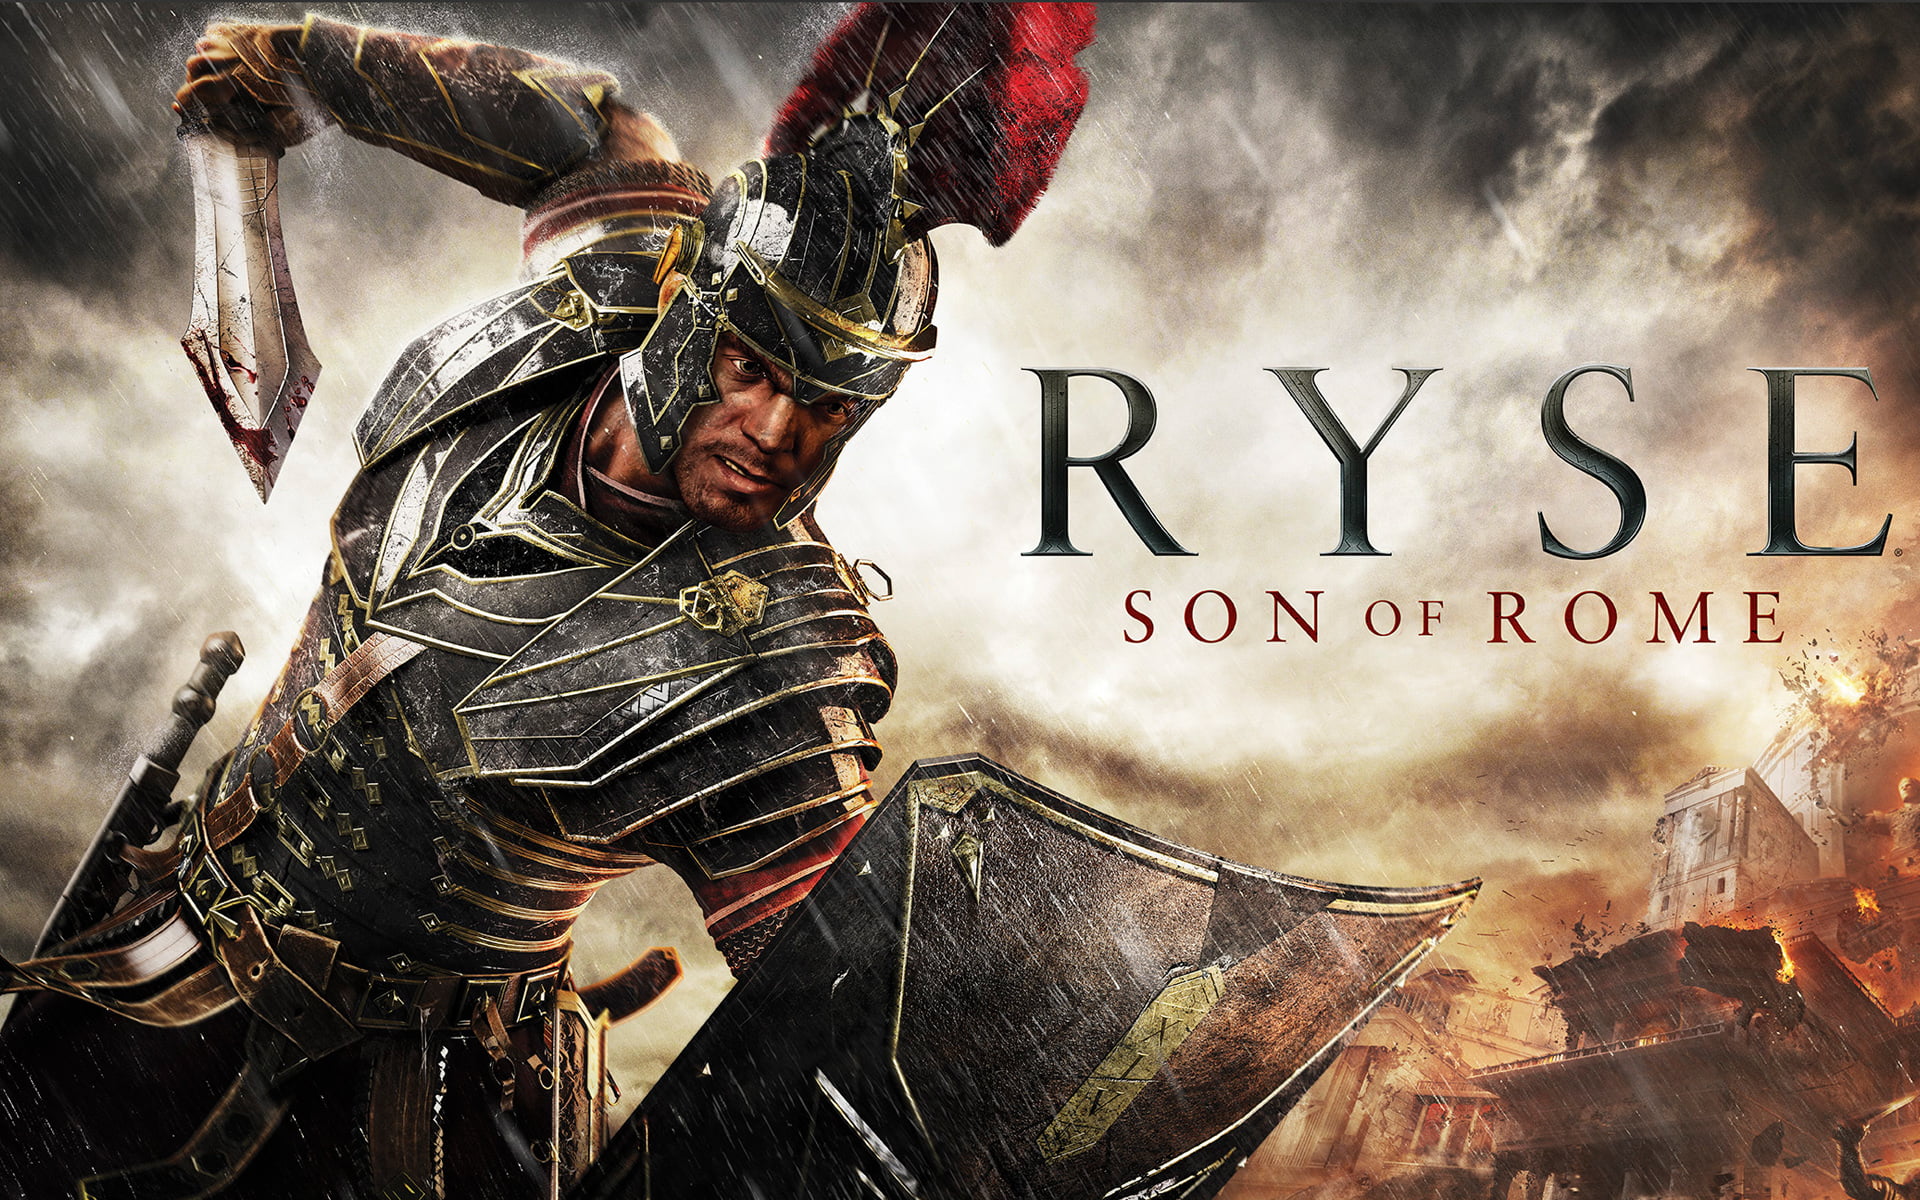  - ryse-son-of-rome-game